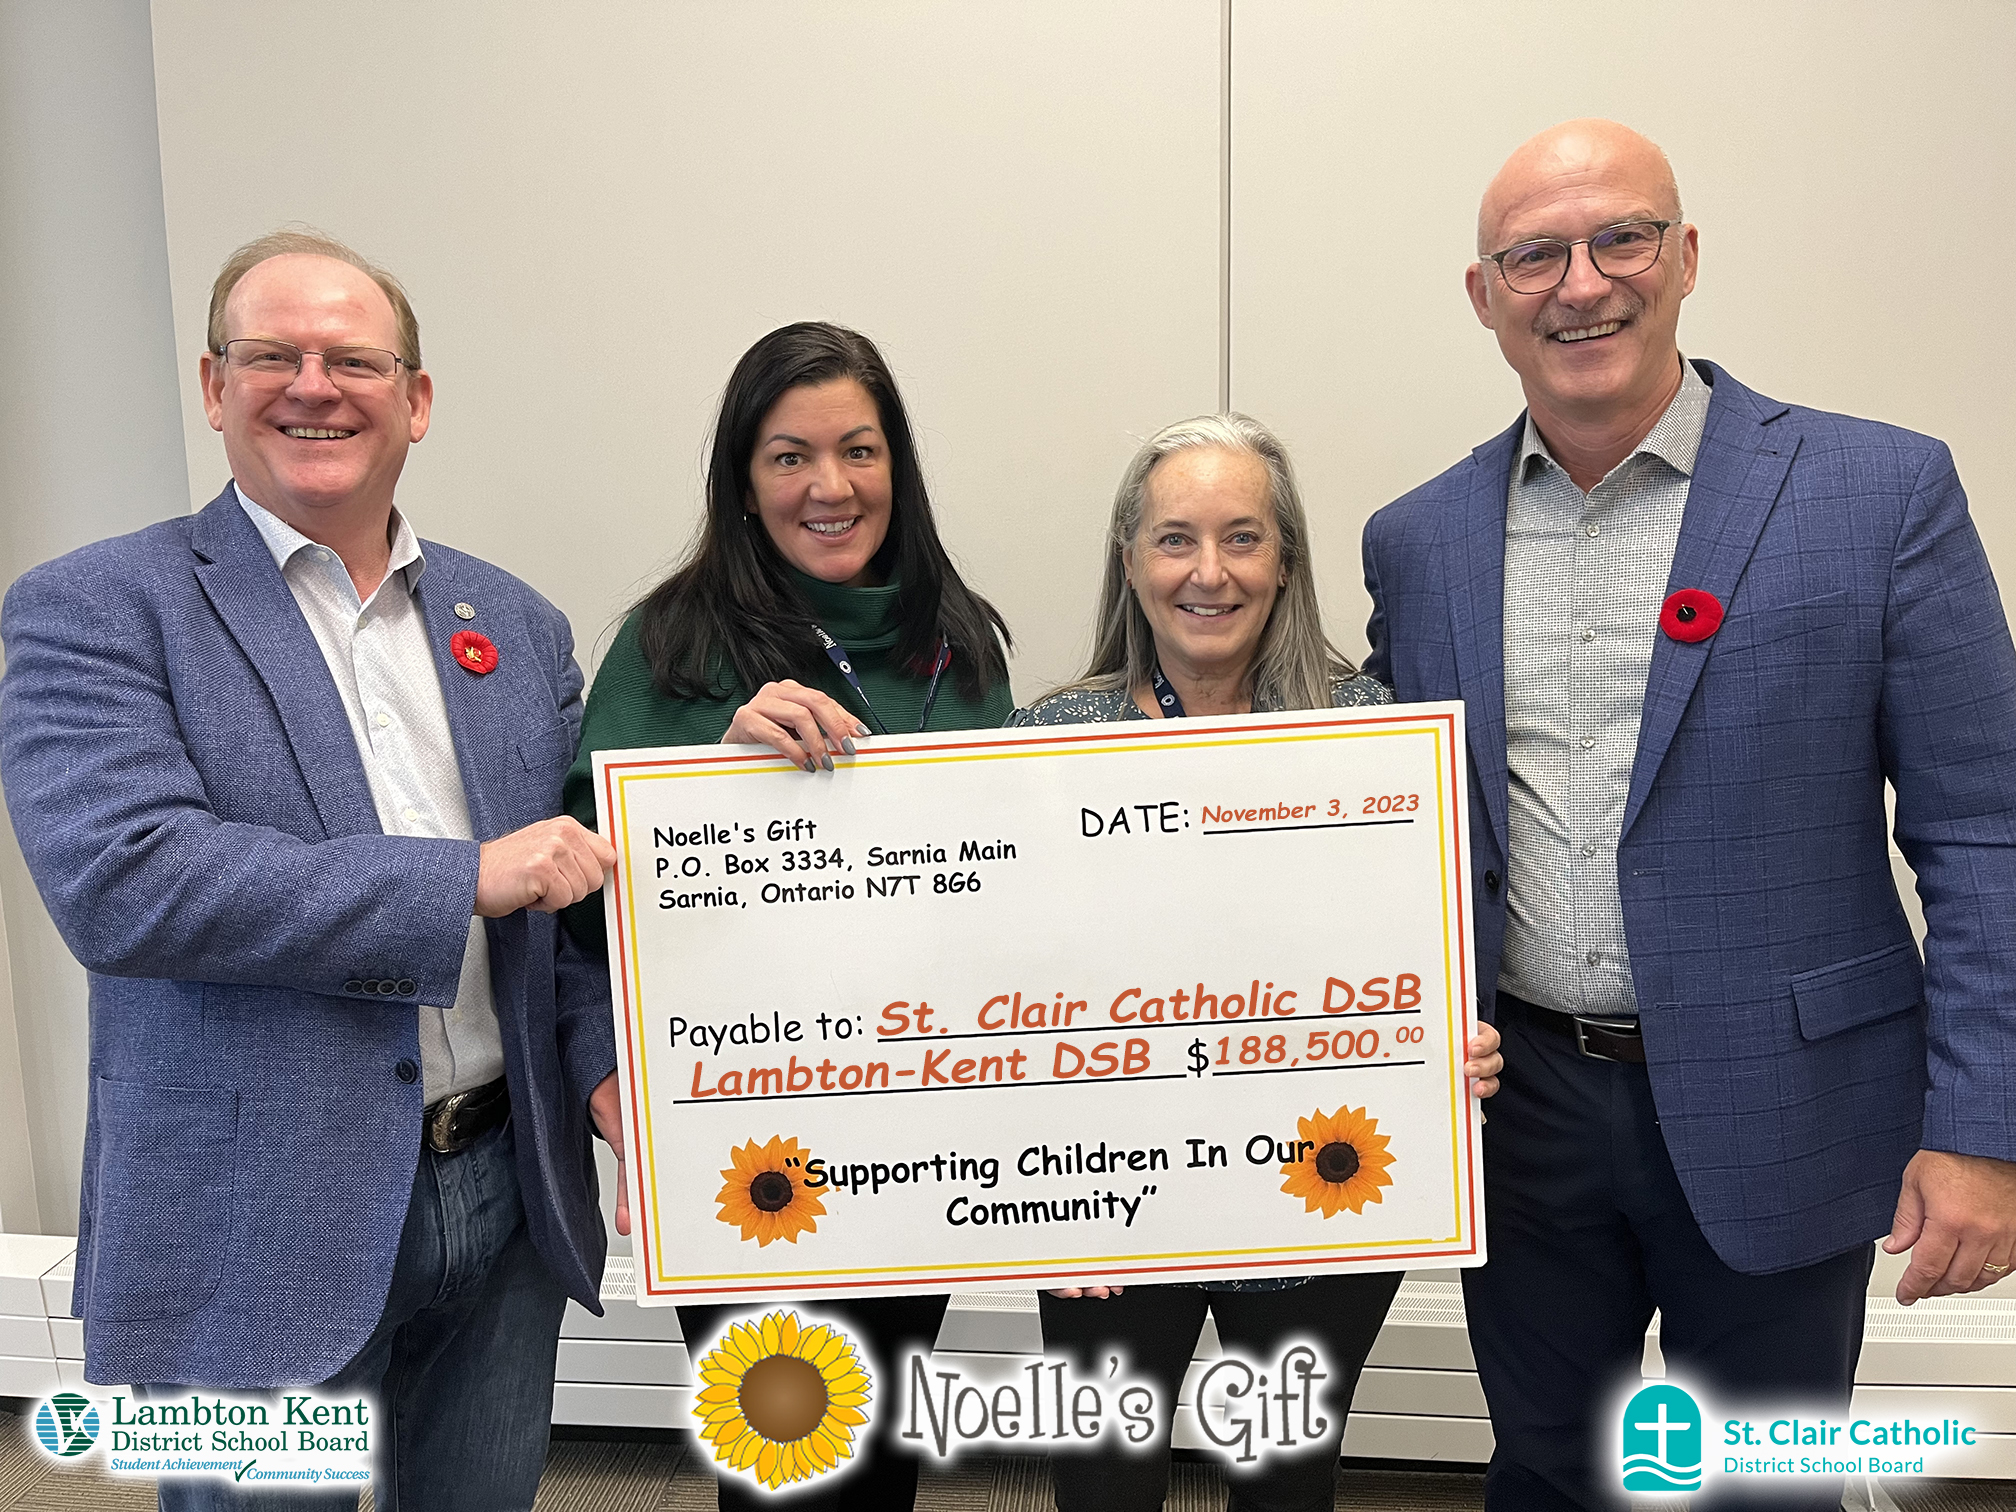 St. Clair Catholic and Lambton Kent District School Boards Share $188,500 in Donations from Noelle’s Gift to Children